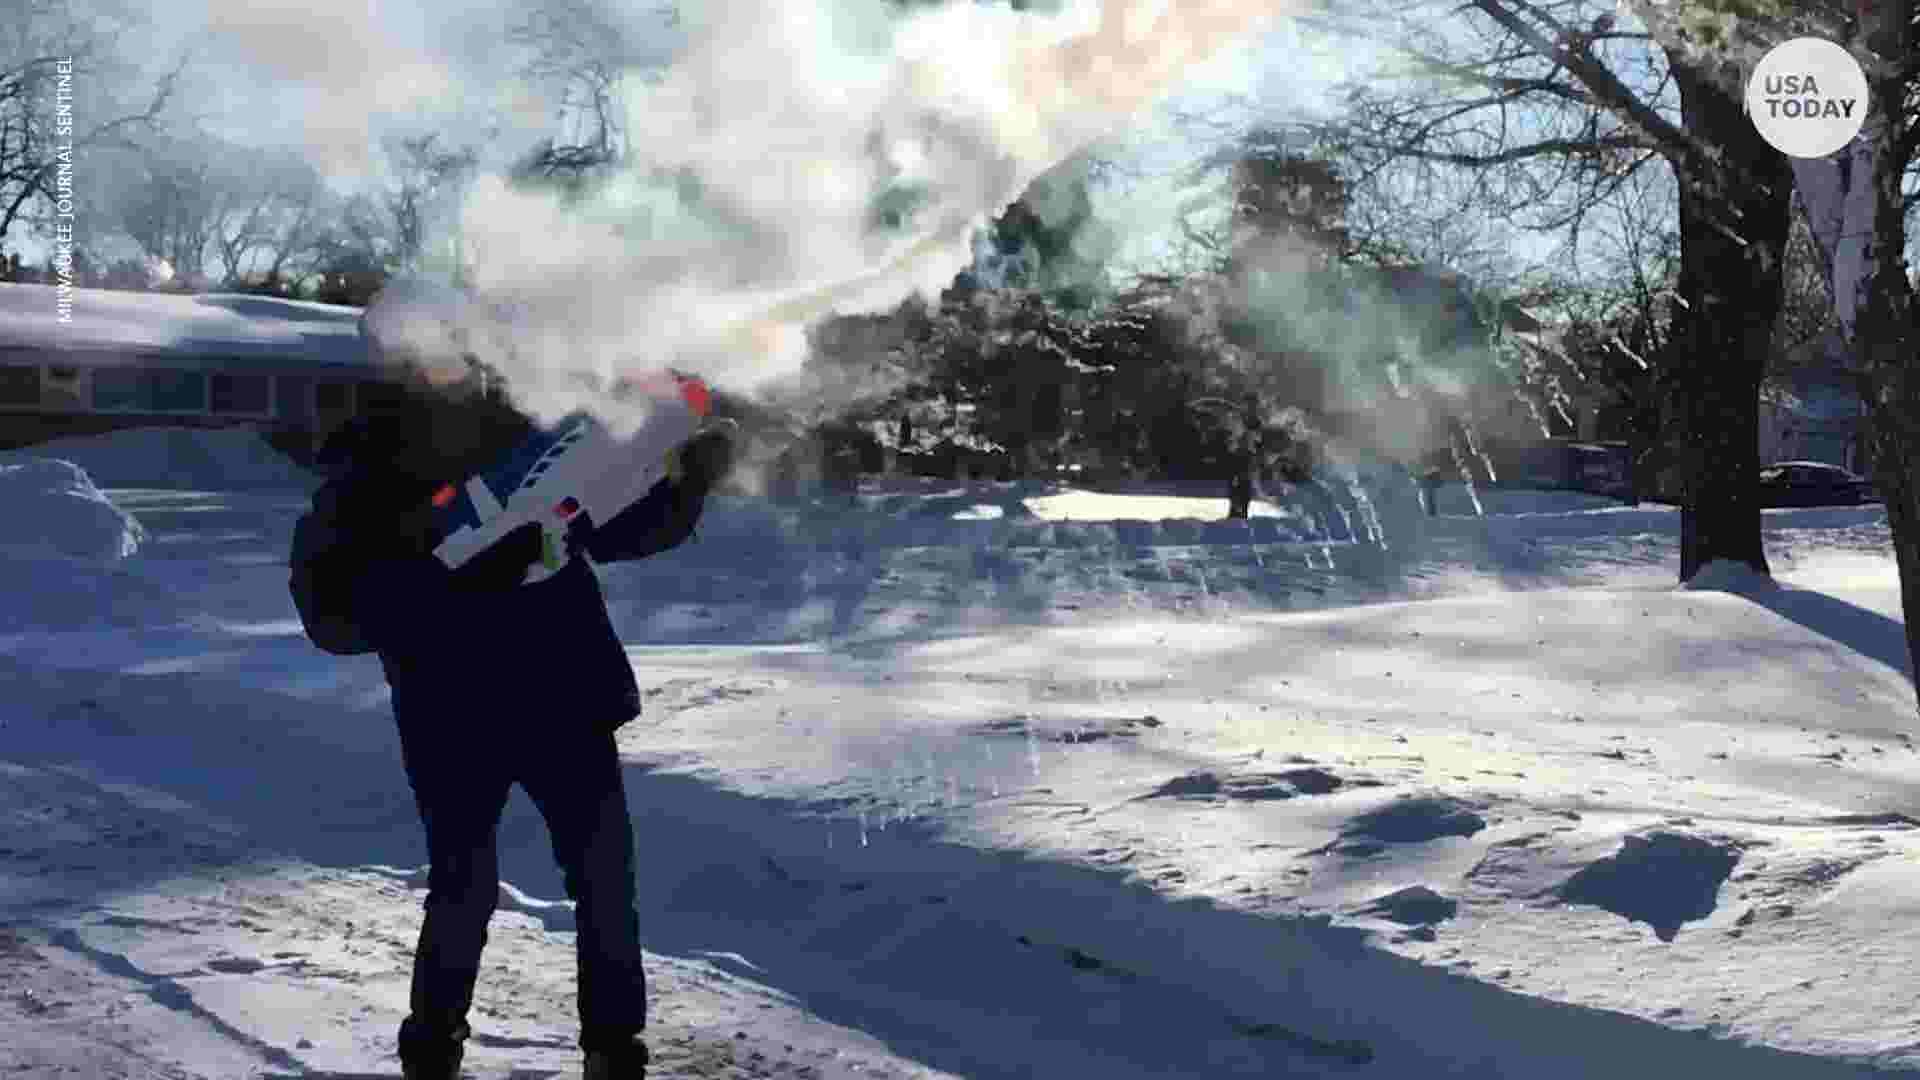 Super Soaker shoots snow bombs in freezing conditions